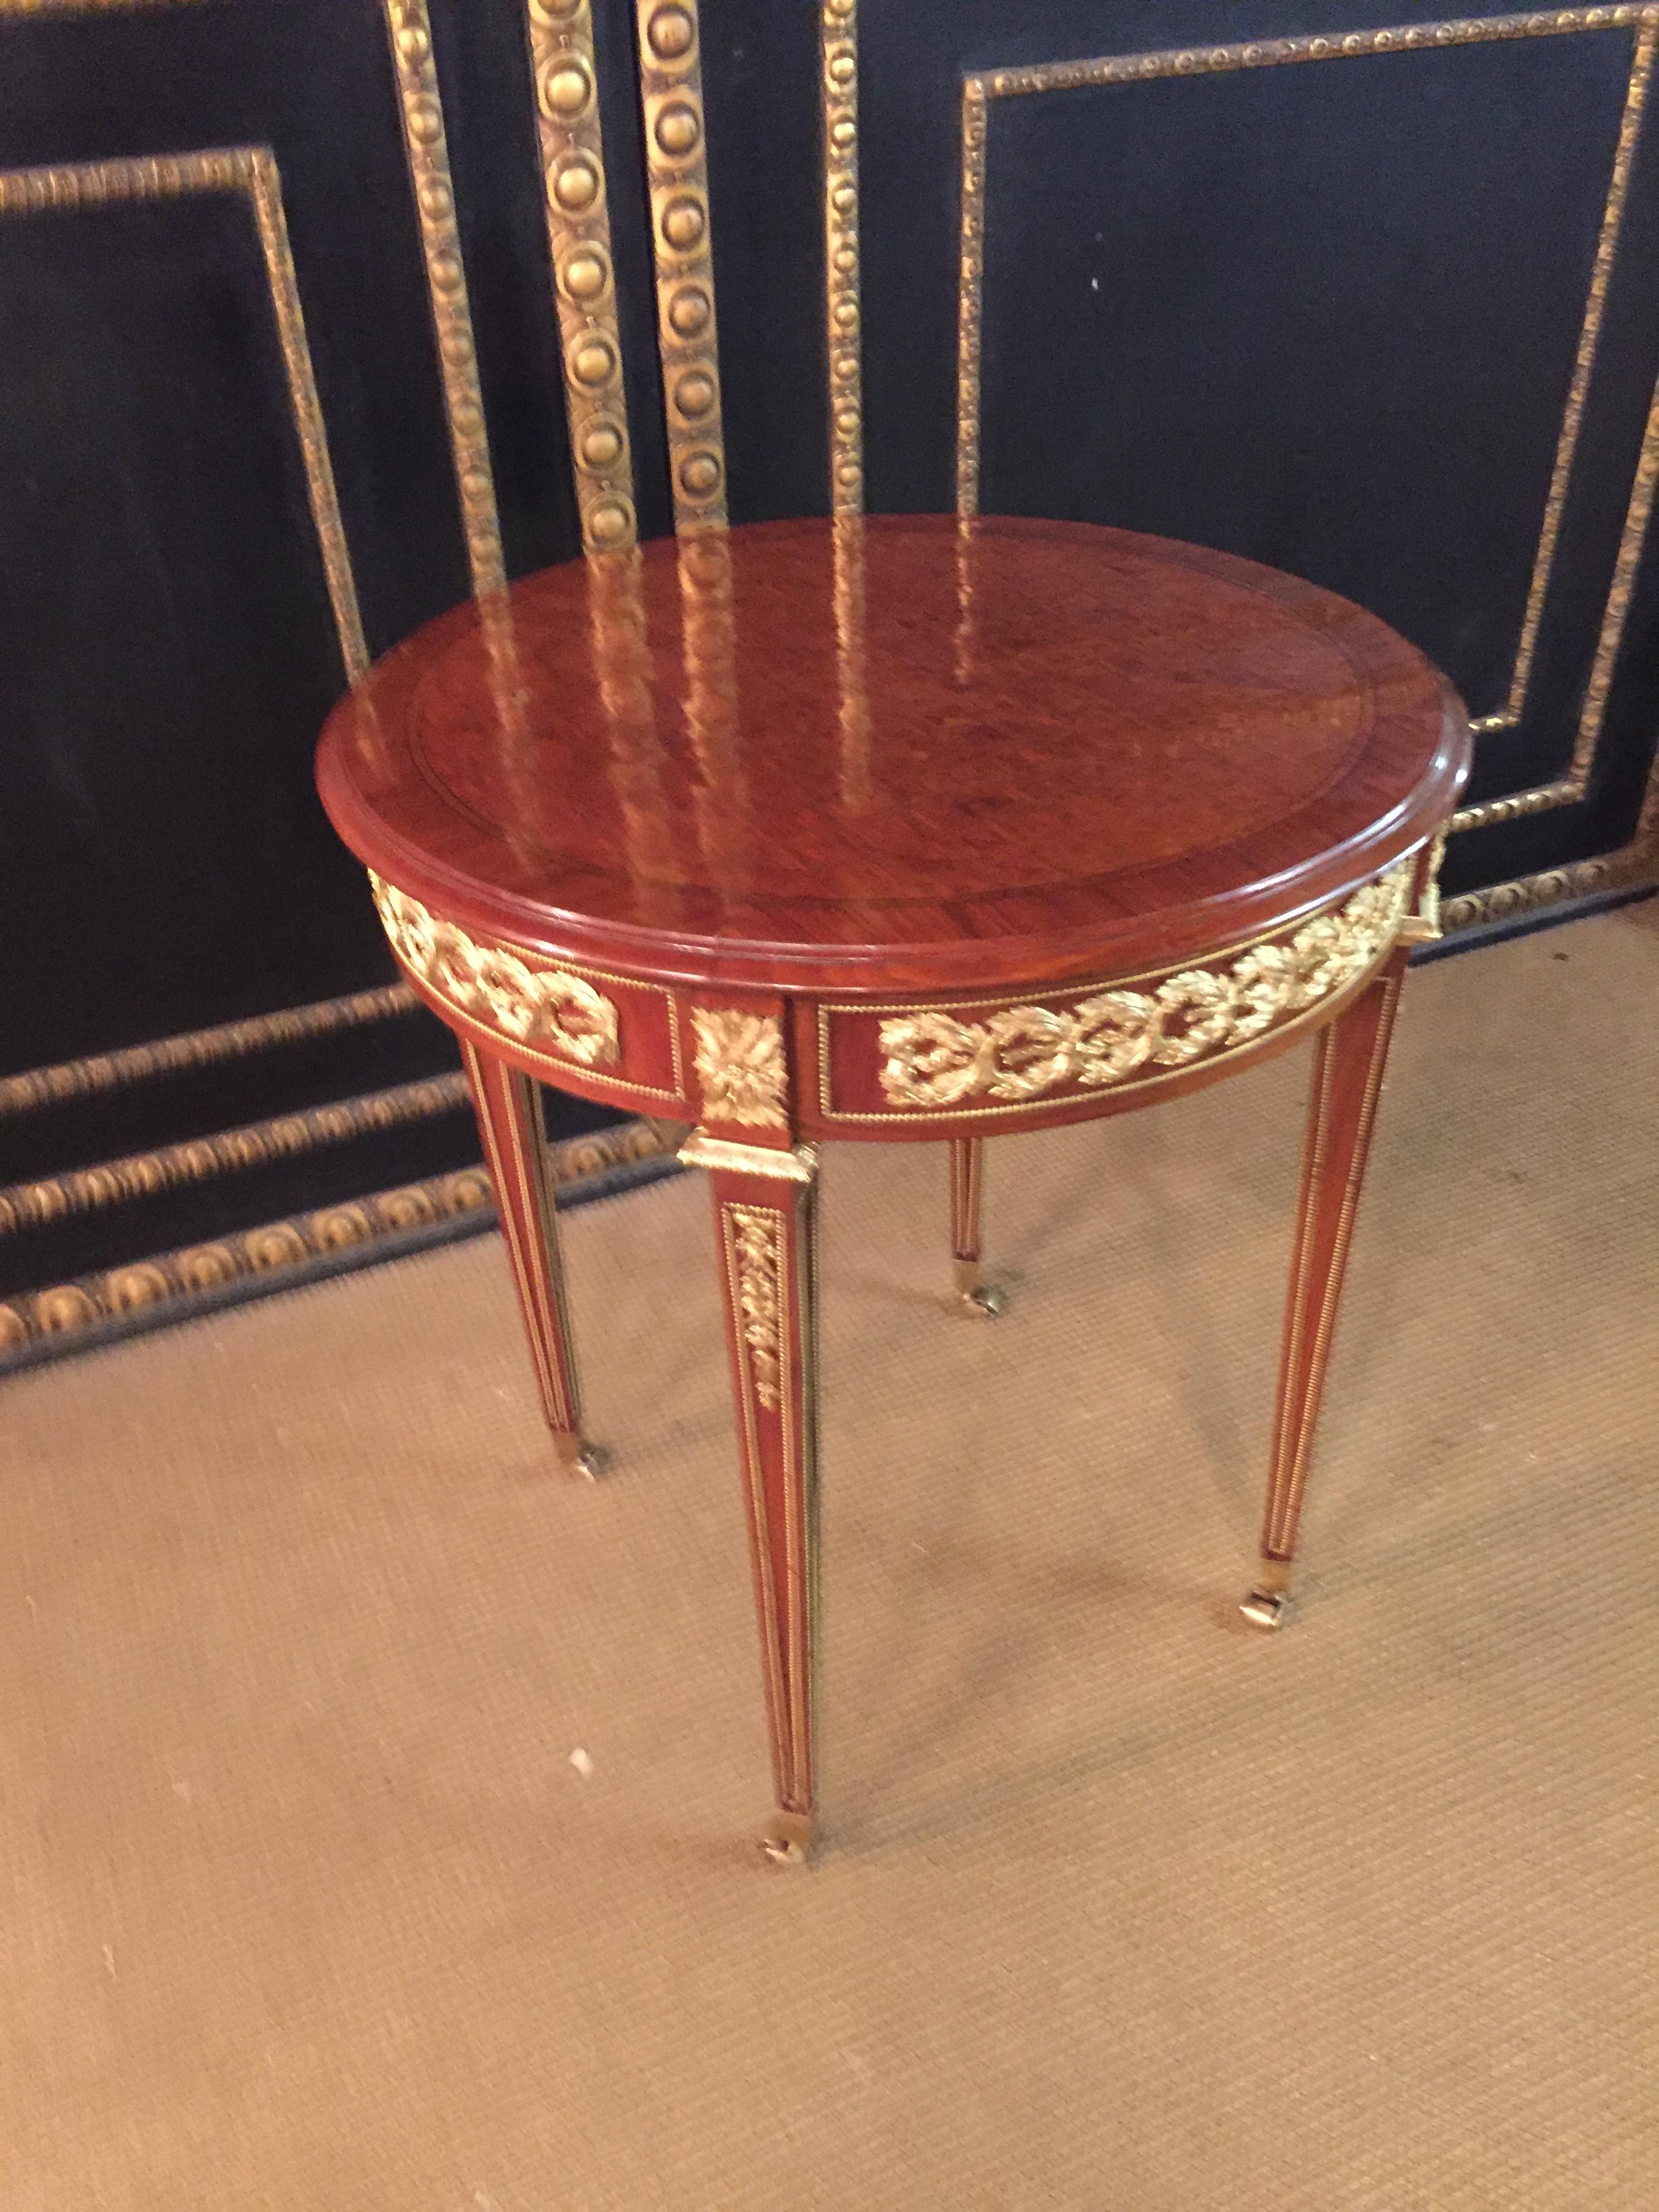 20th Century Louis XVI Style with Round Platte with Inlays French Table 11